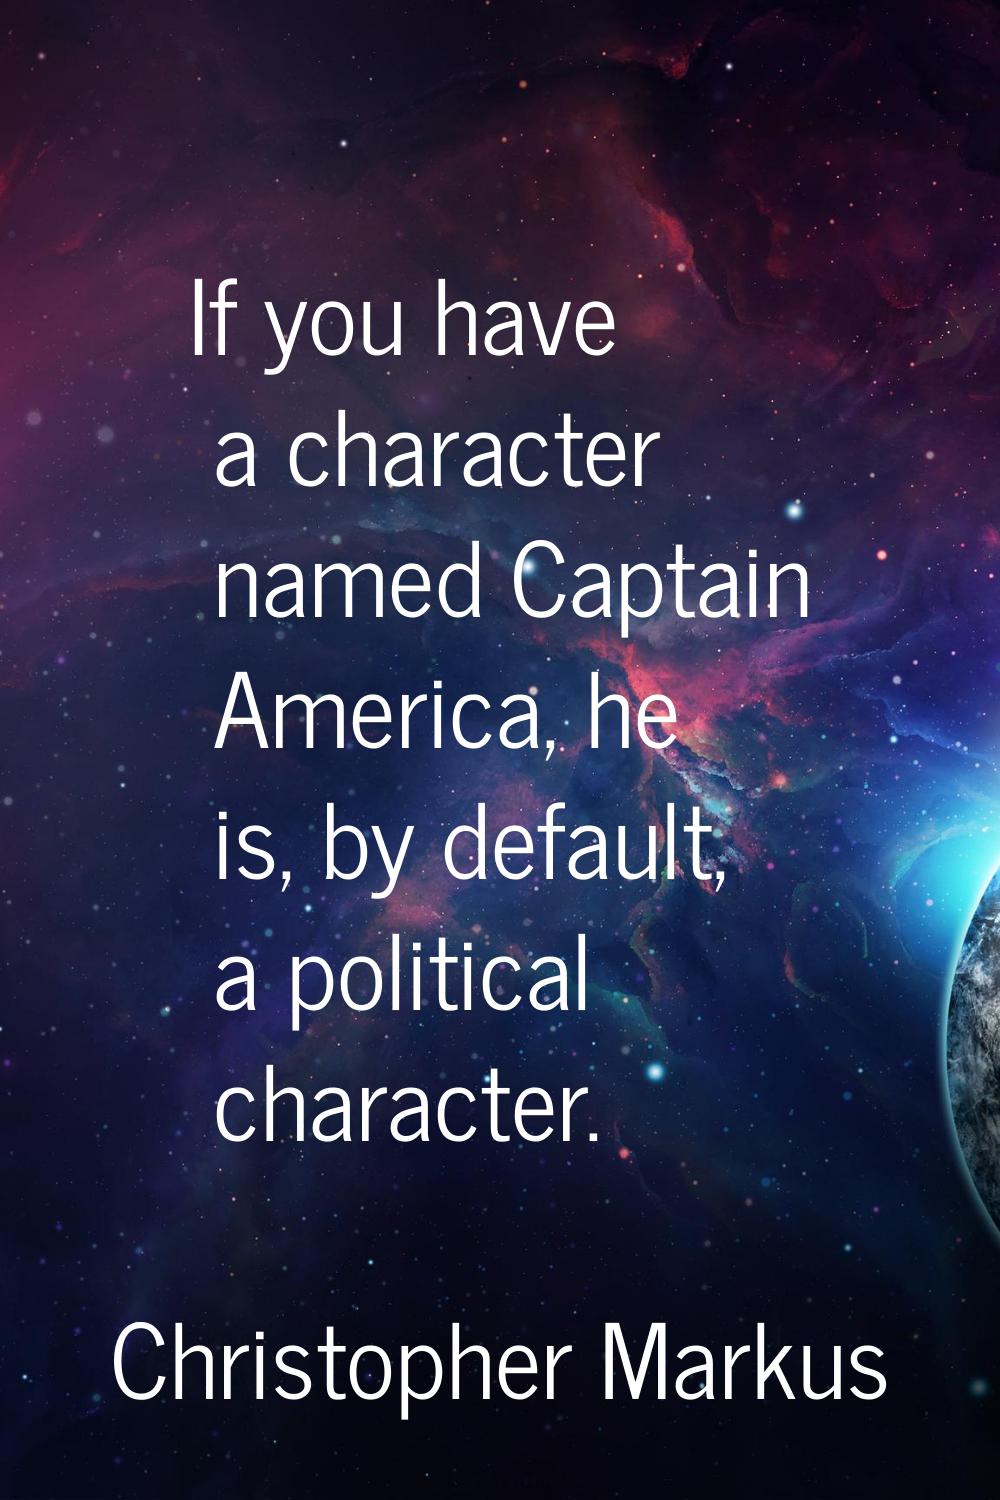 If you have a character named Captain America, he is, by default, a political character.